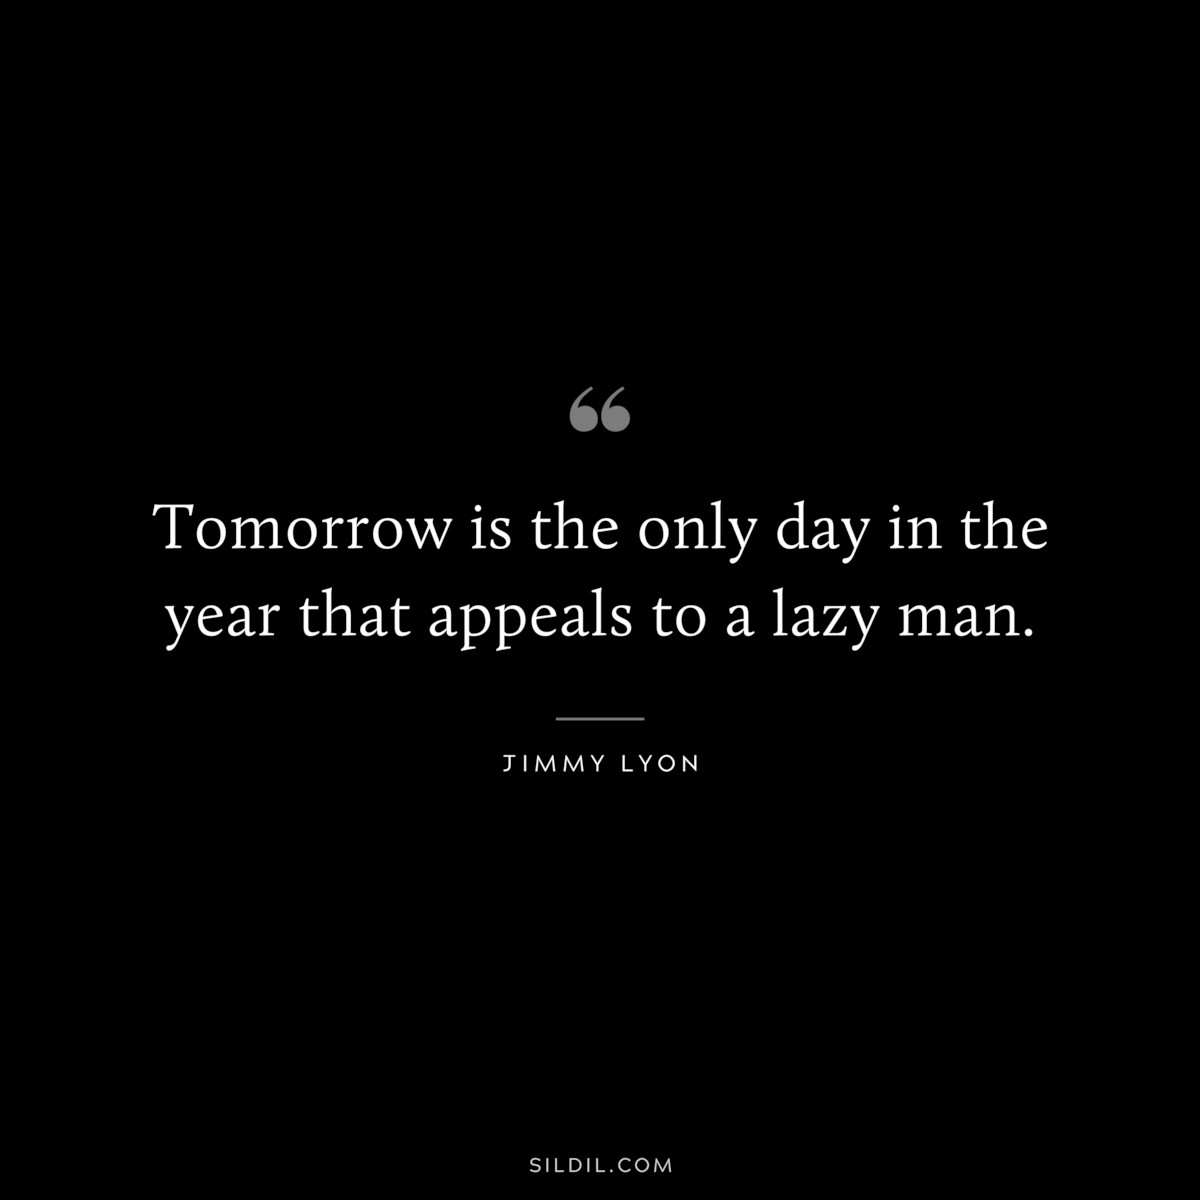 Tomorrow is the only day in the year that appeals to a lazy man. ― Jimmy Lyon